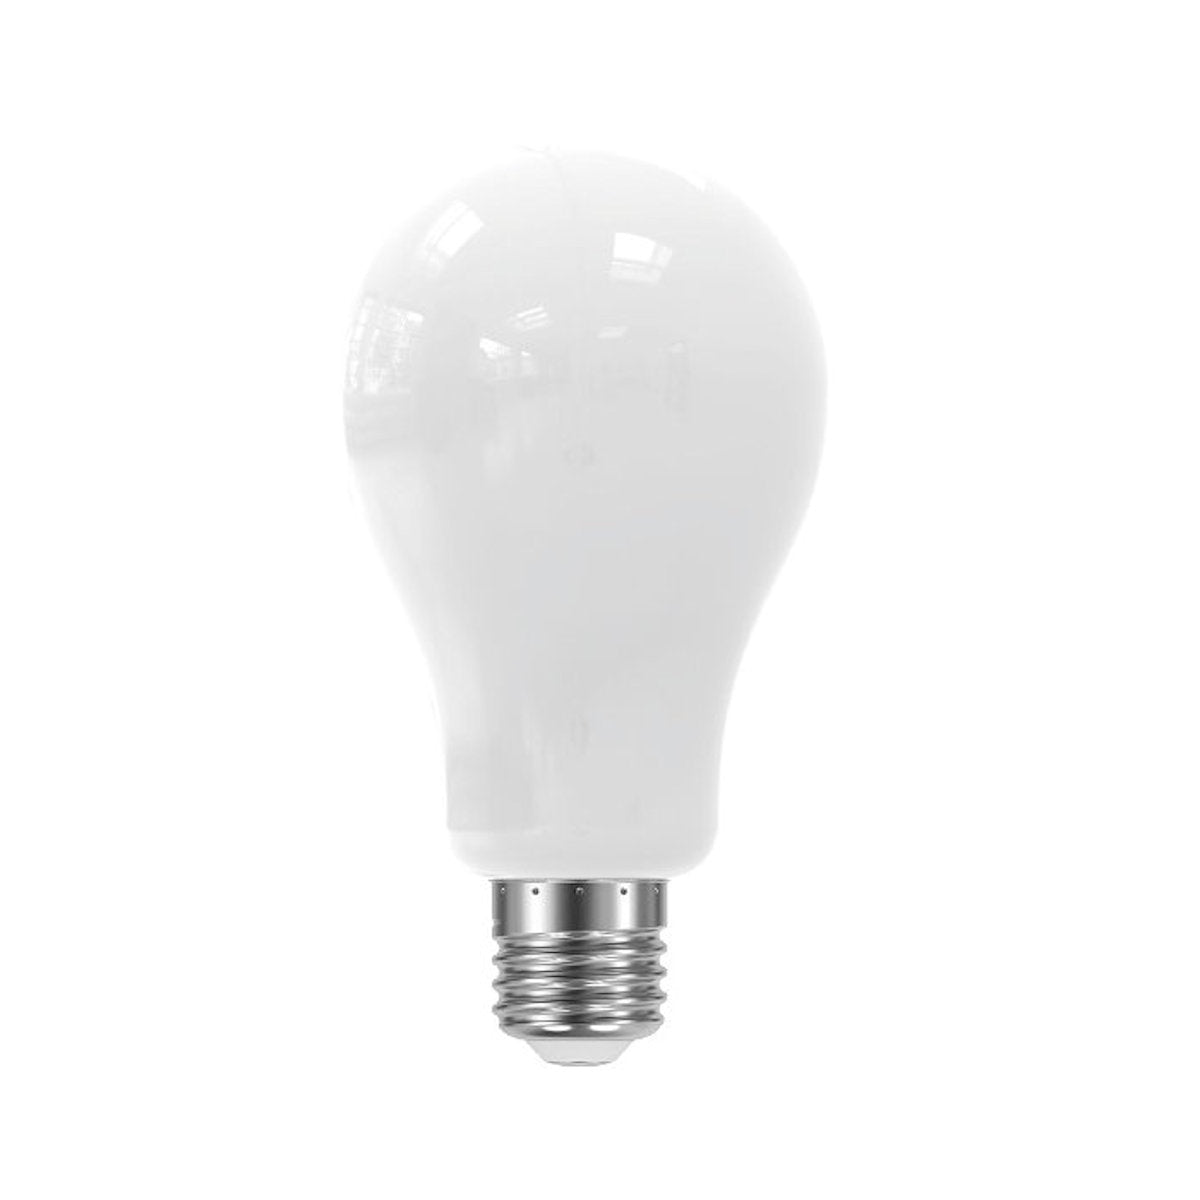 A60 8W E27 Dimmable LED Lamp (Pack Of 4)